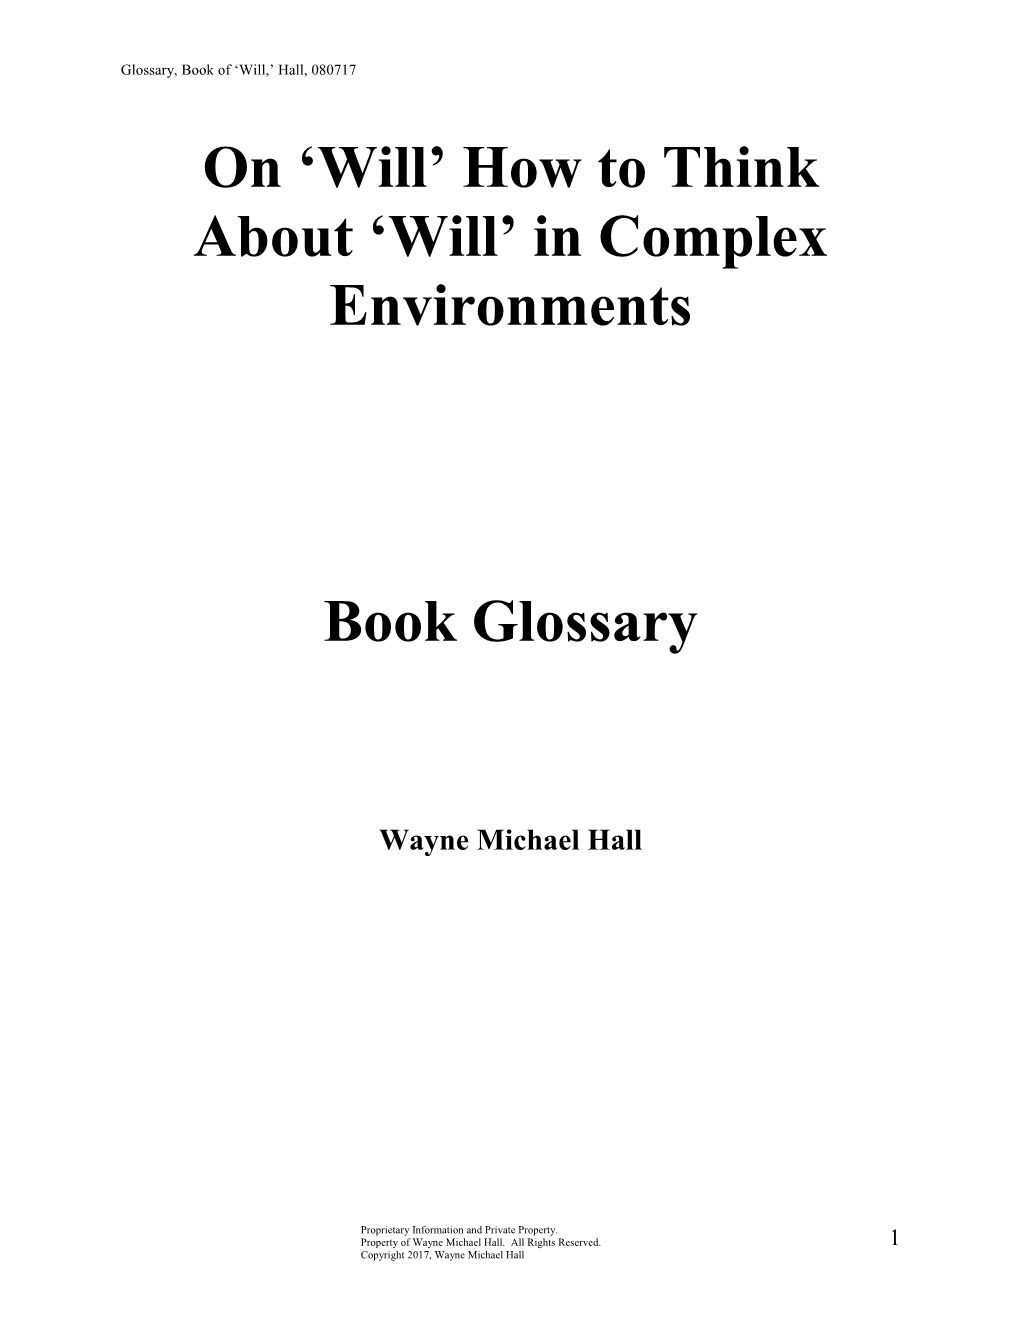 On Will How to Think About Will in Complex Environments